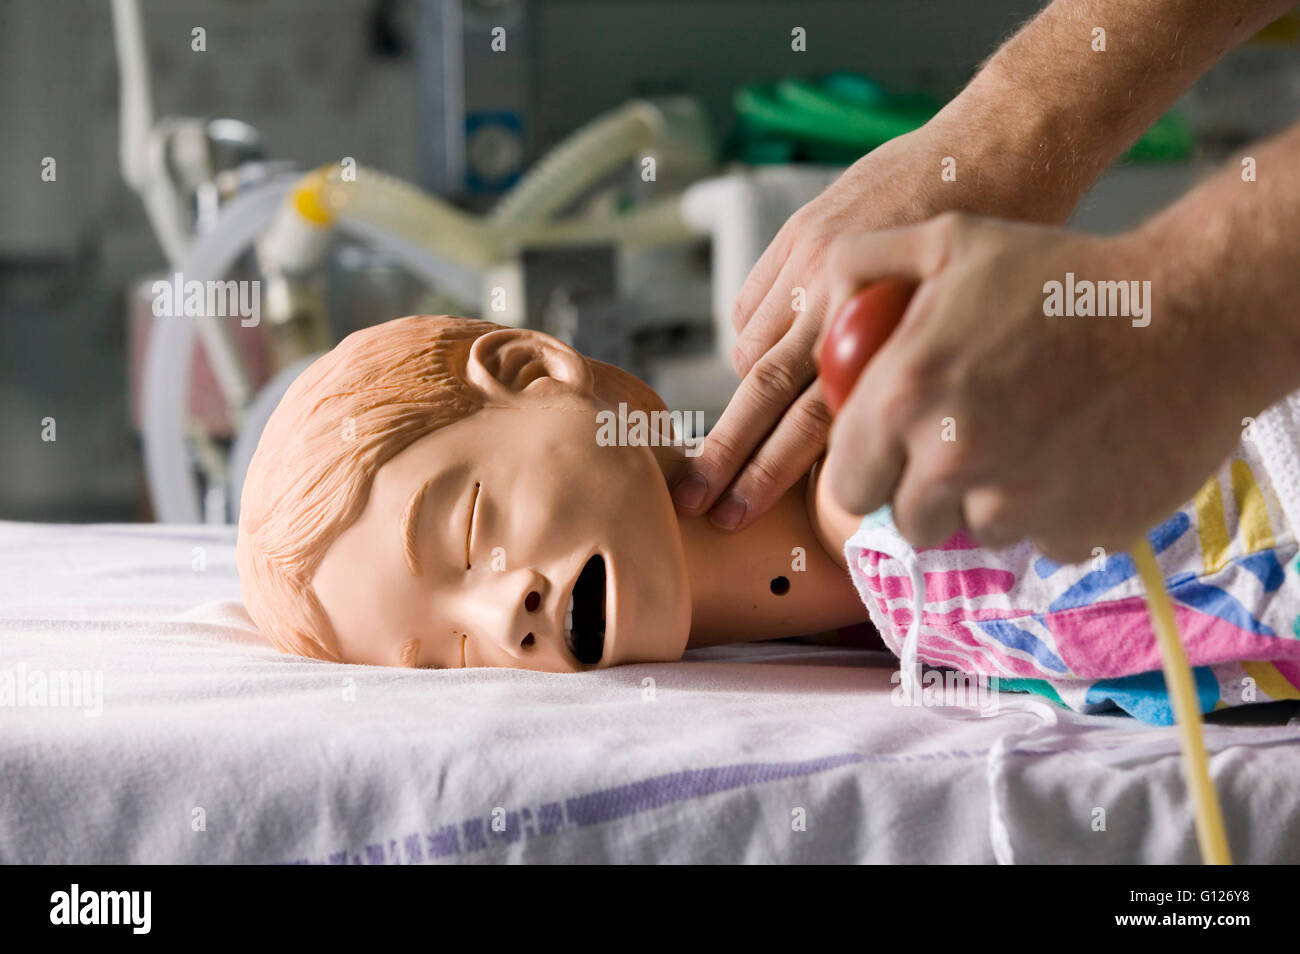 Patient Simulator For Education And Training In Hospitals Stock Photo